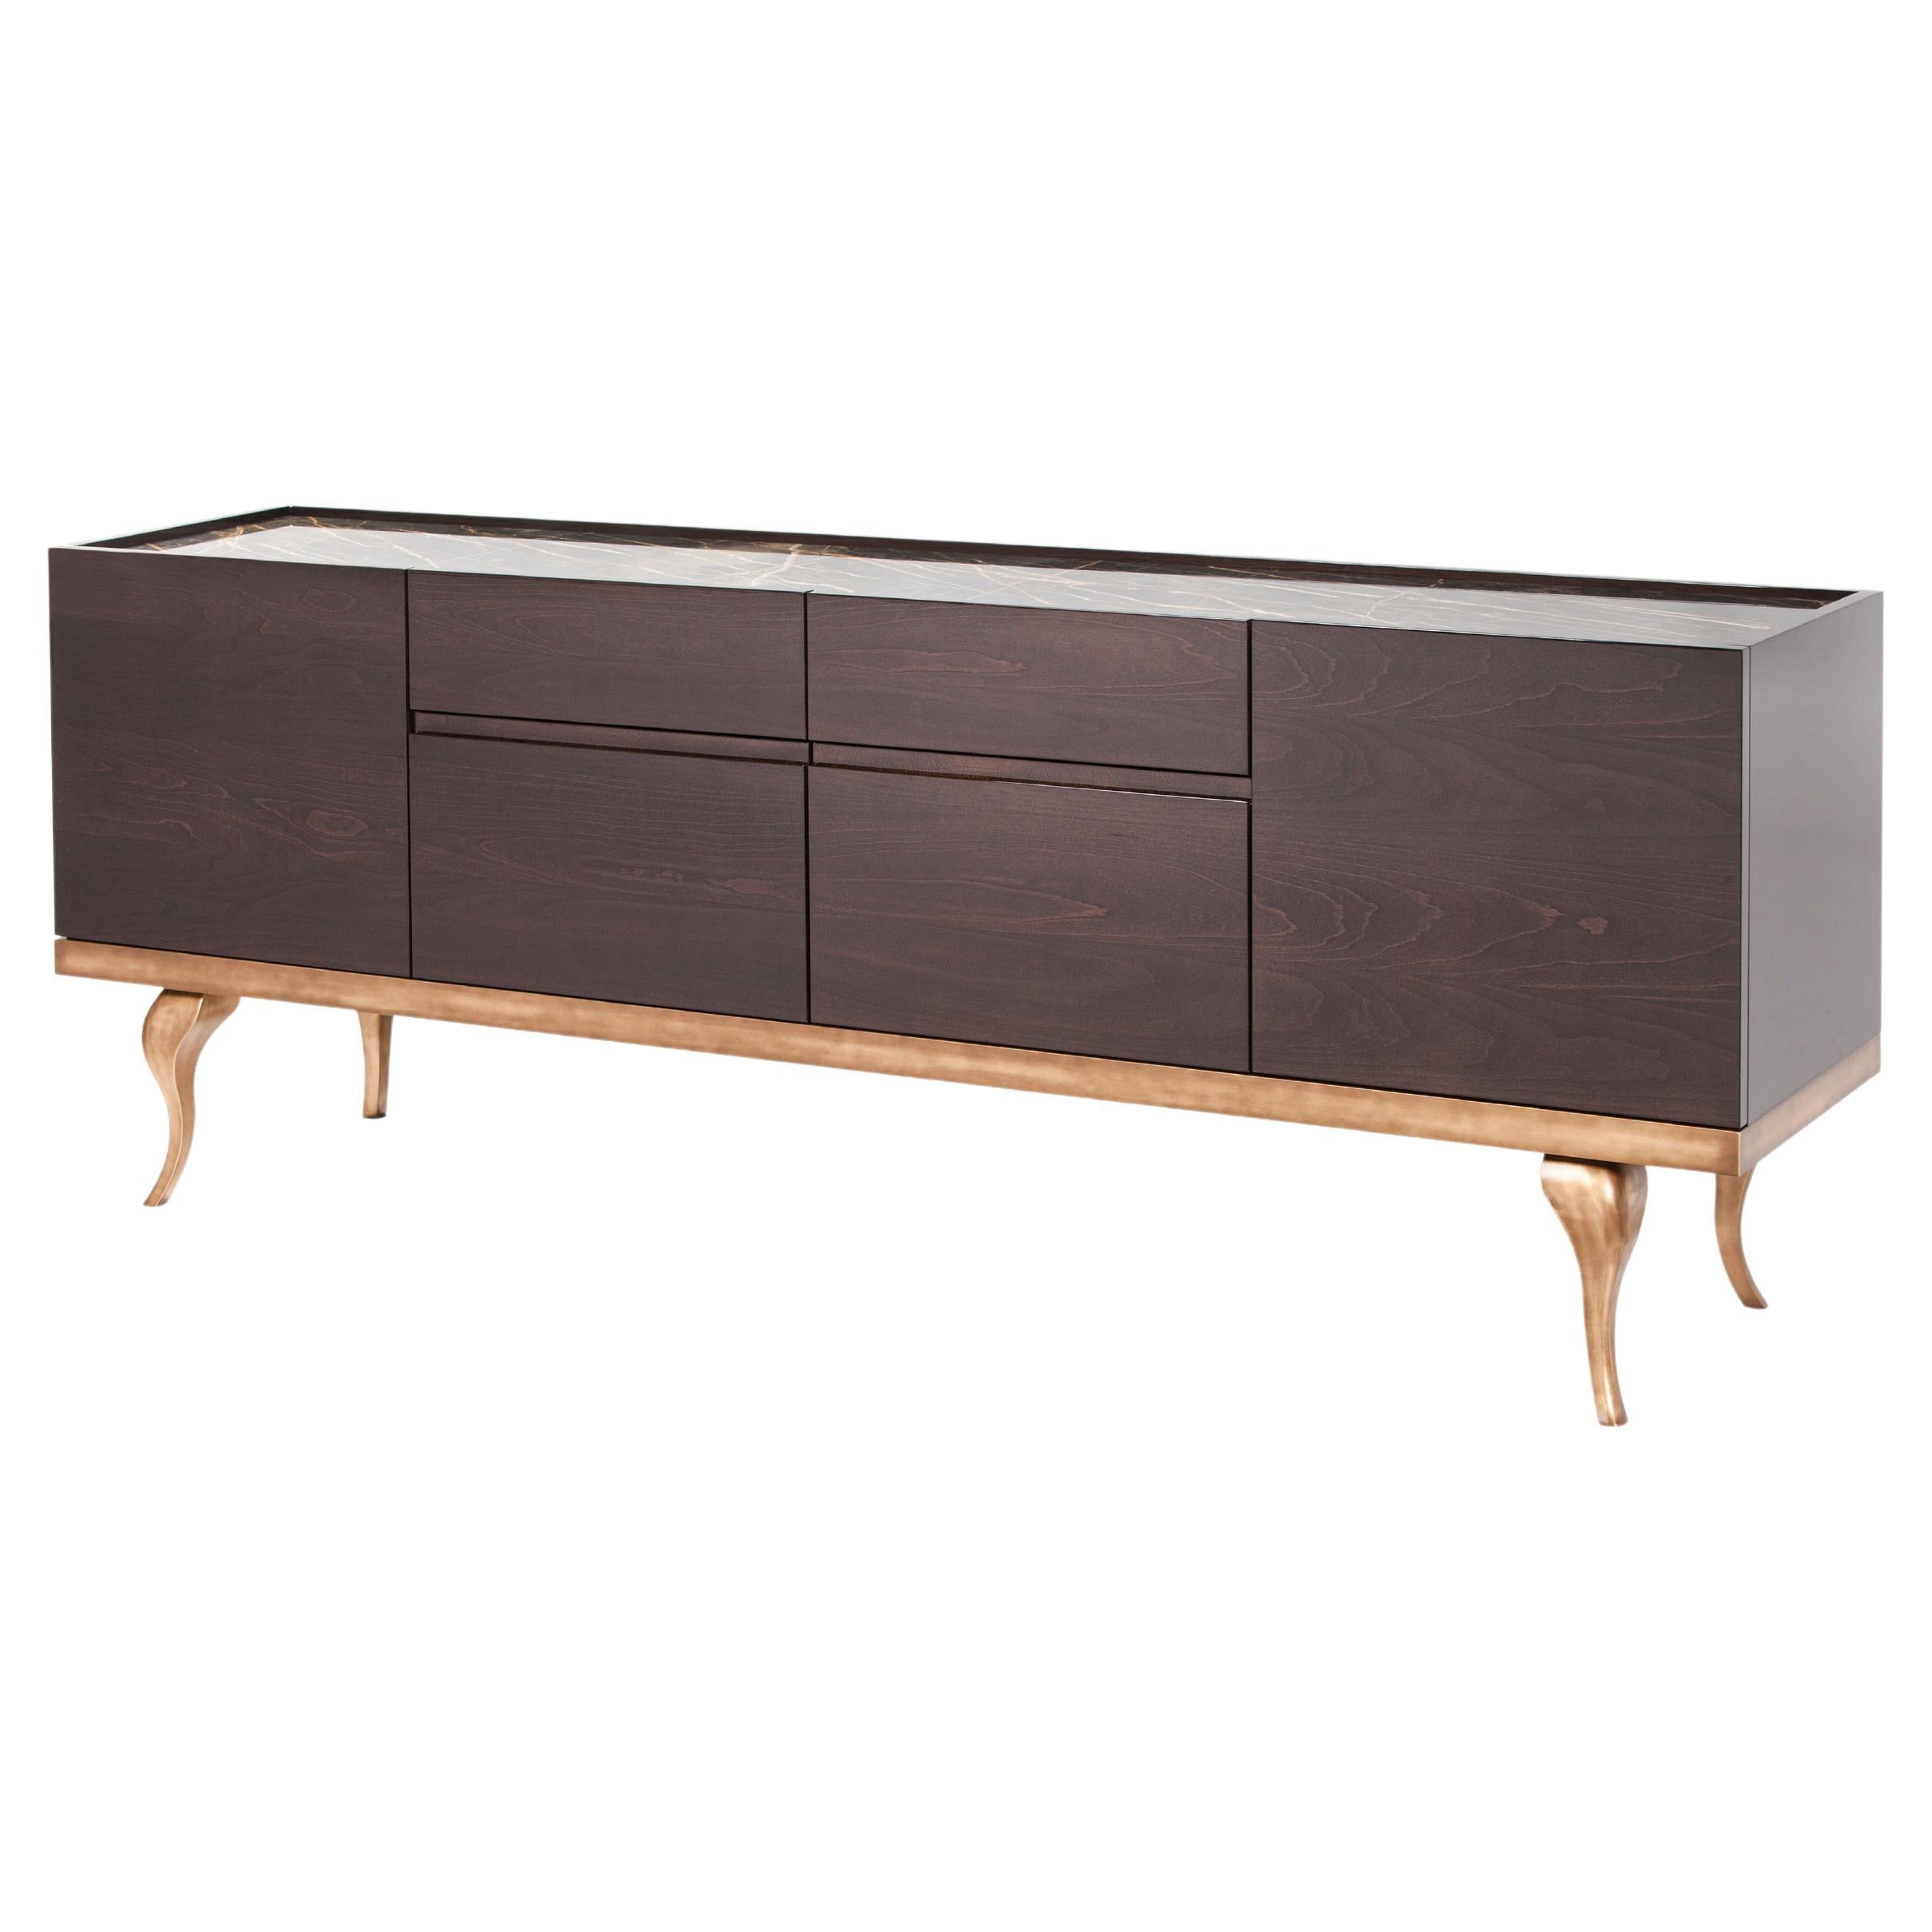 21st Century Modern Londres Sideboard Handcrafted in Portugal by Greenapple